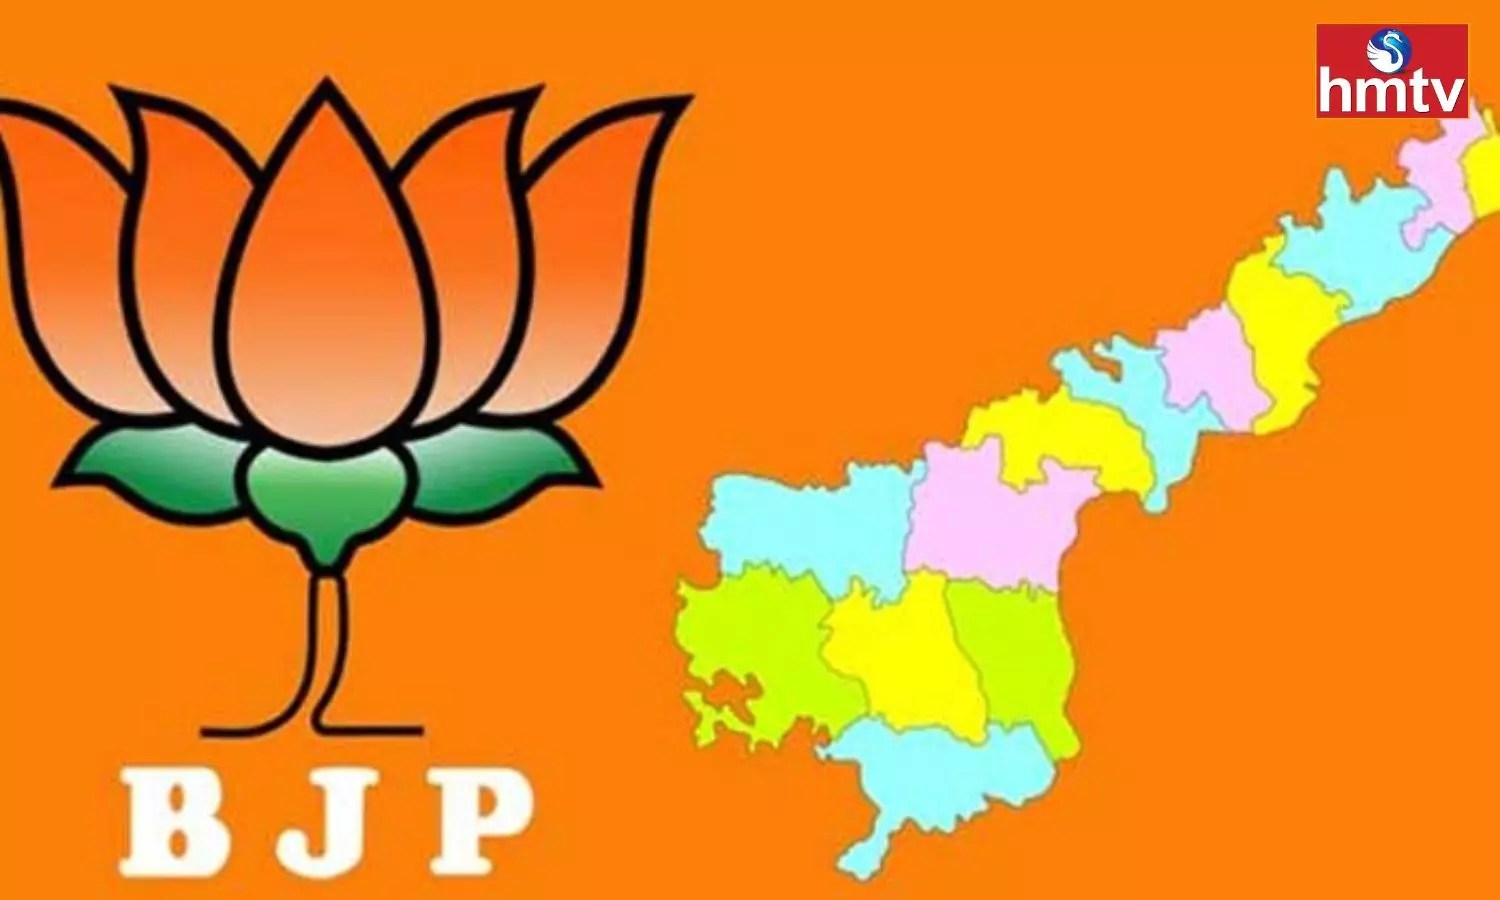 Today is the second day of Meeting of AP BJP Chief leaders